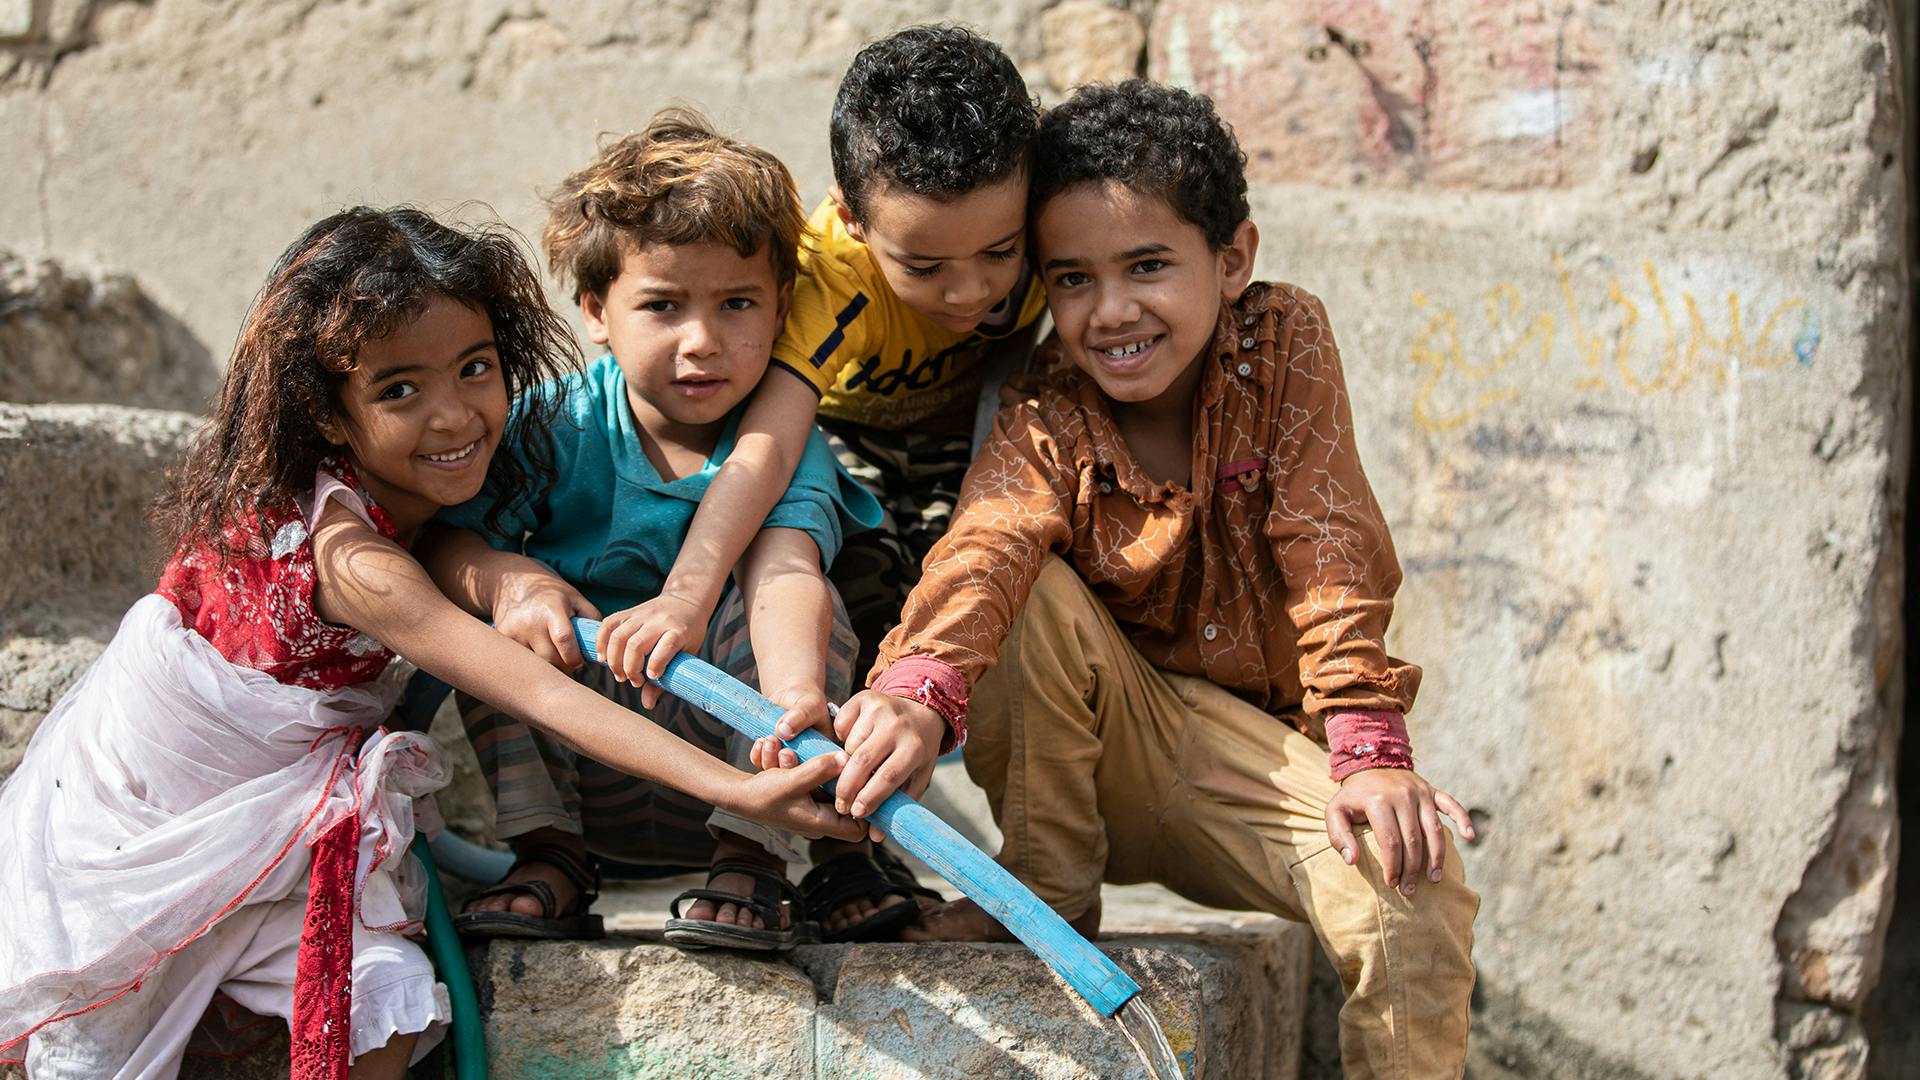 Children while filling a pail with water in Al Nusayria Neighborhood - Al Mudhaffar District - Taizz Governorate, Yemen, and they are extremely happy with the water arrival.